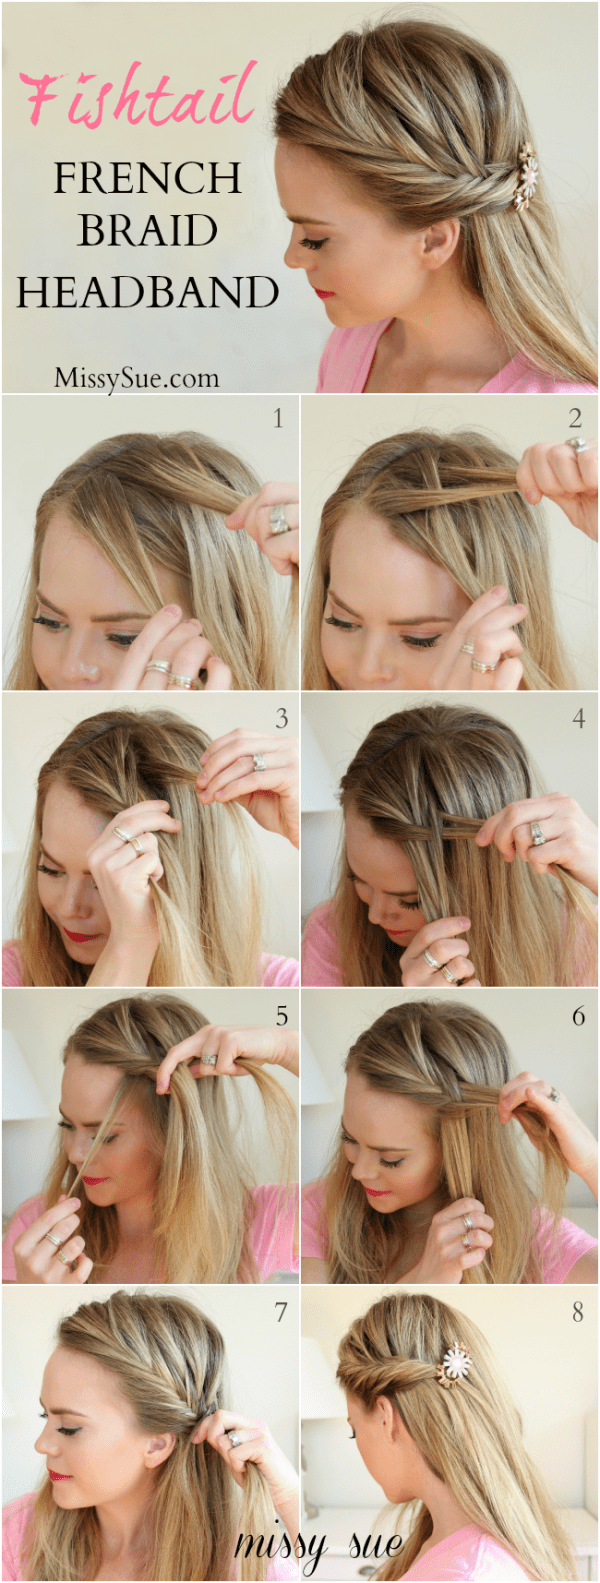 10 Absolutely Amazing Hairstyle Tips And Ideas Ready For Only A Minute